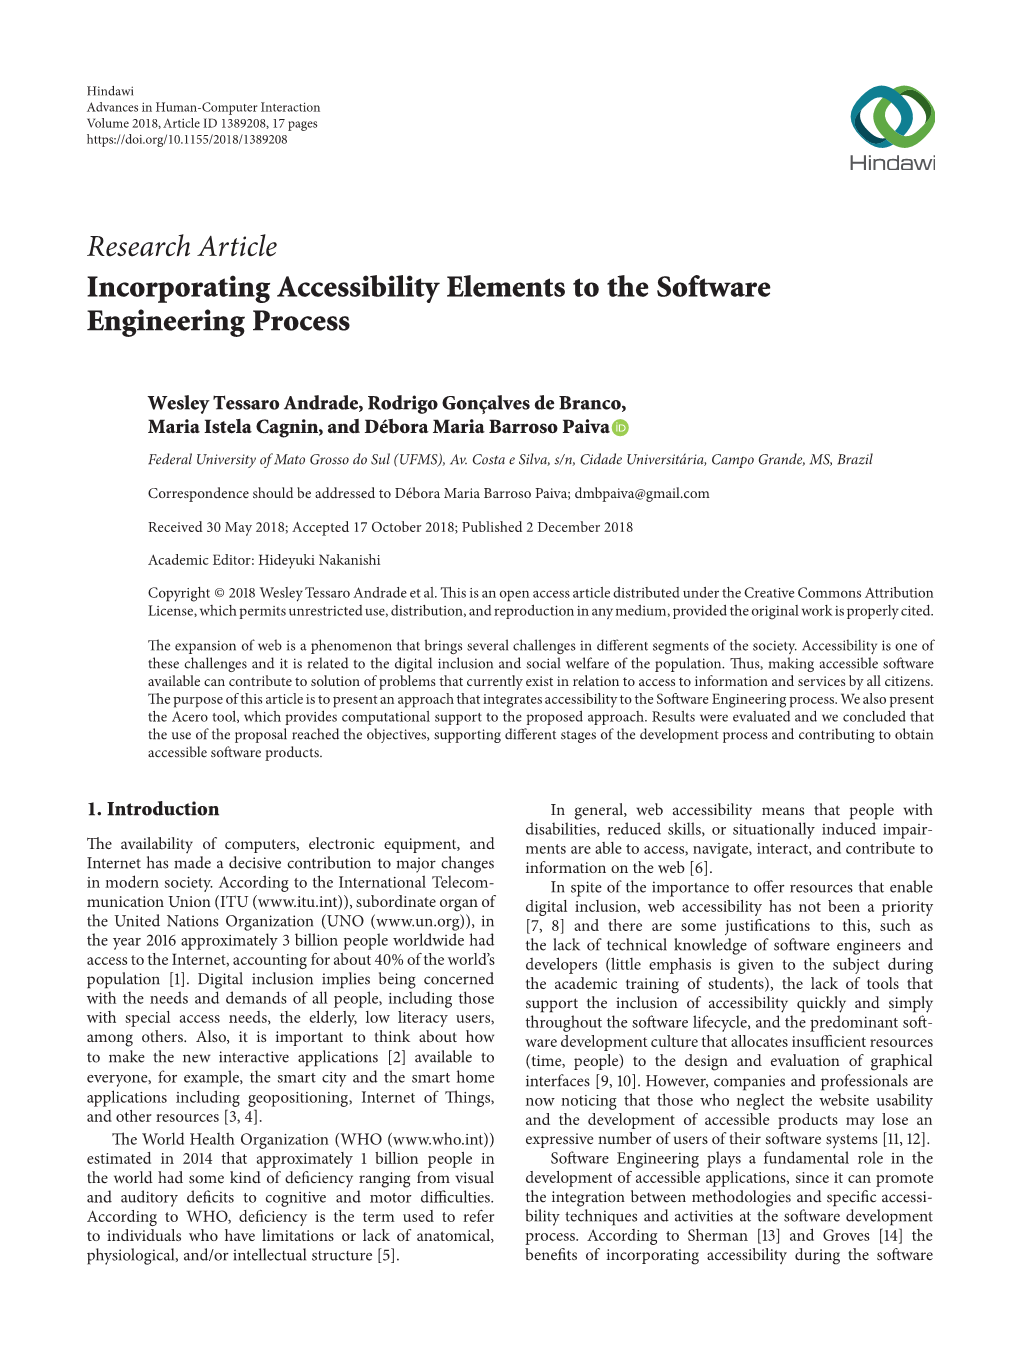 Incorporating Accessibility Elements to the Software Engineering Process